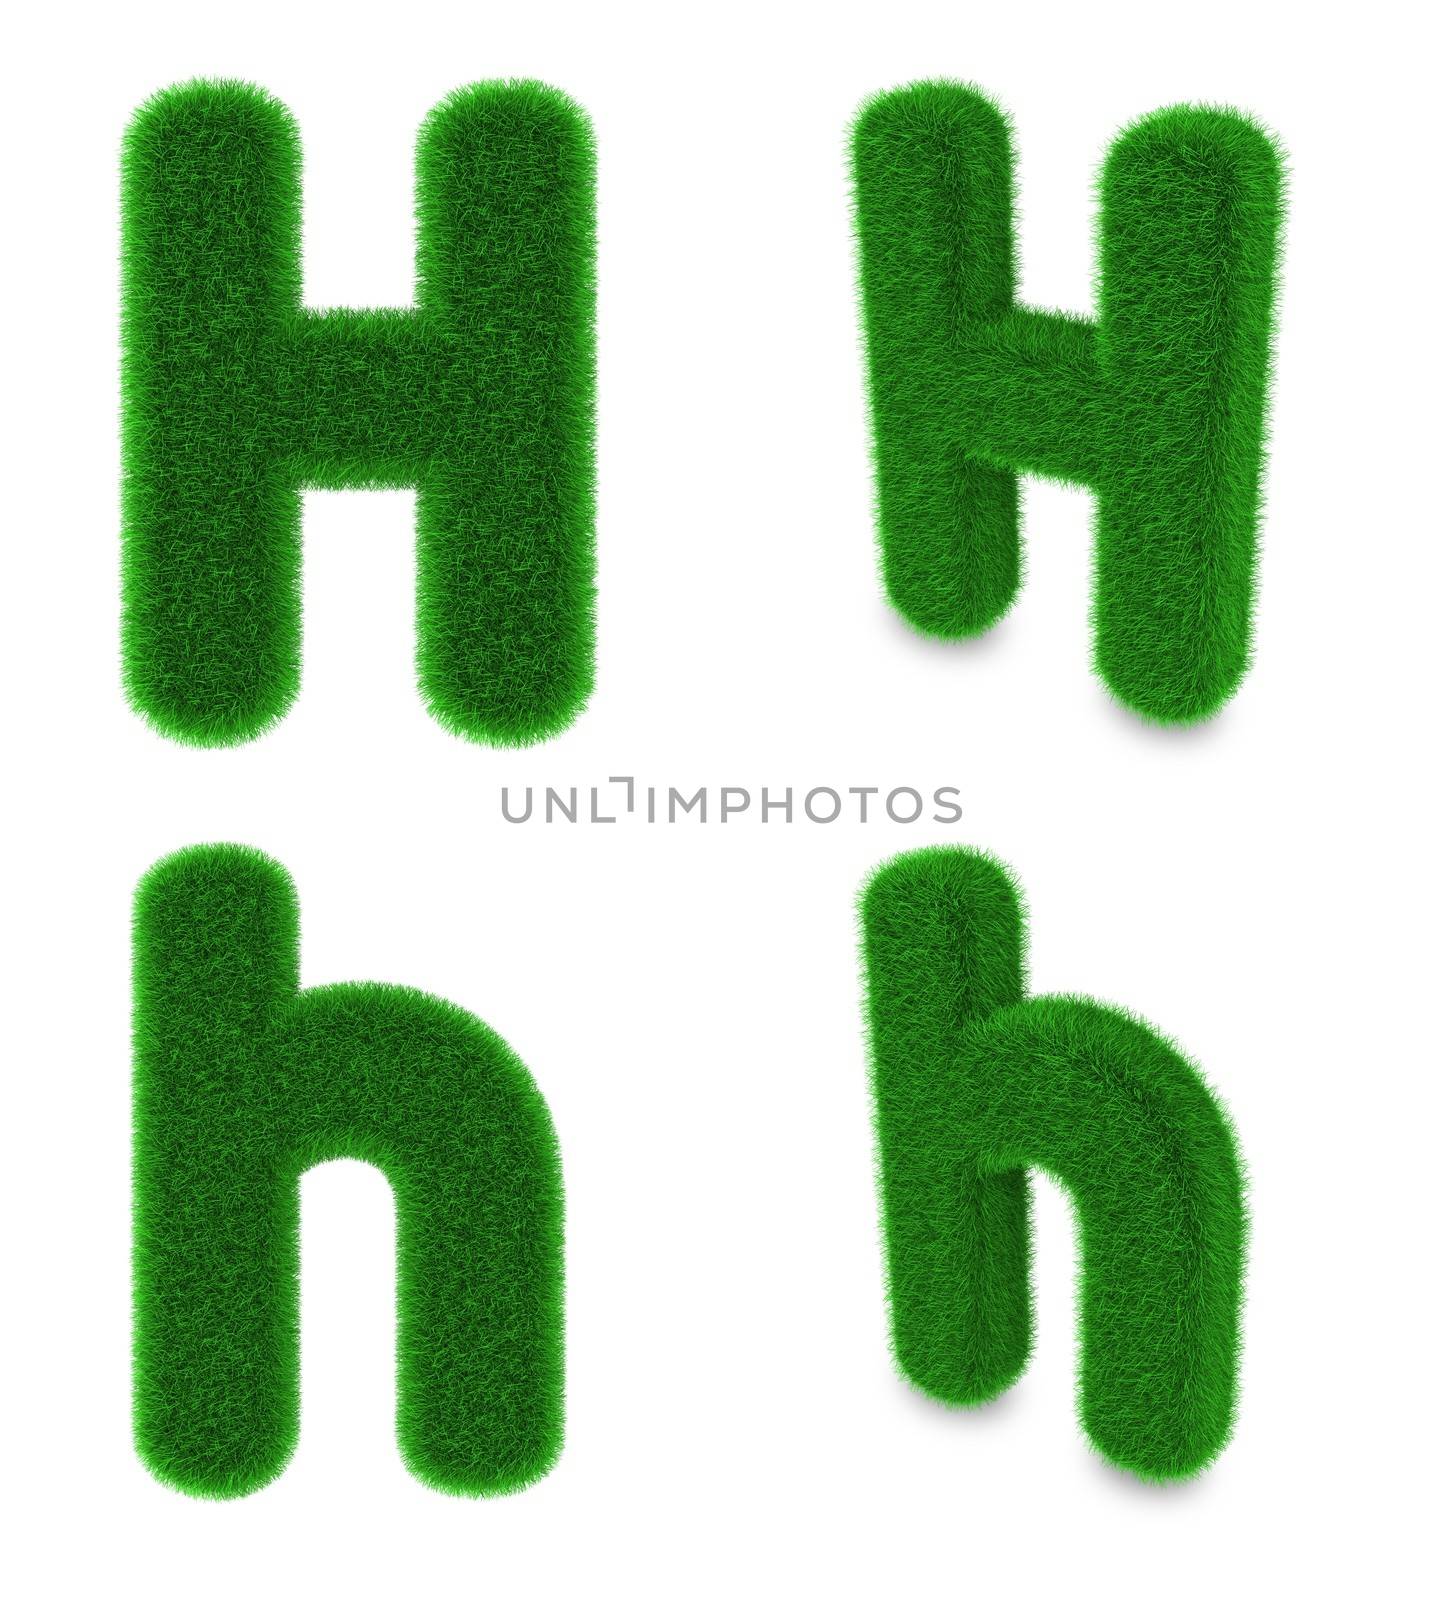 Letter H covered by green grass isolated on white background